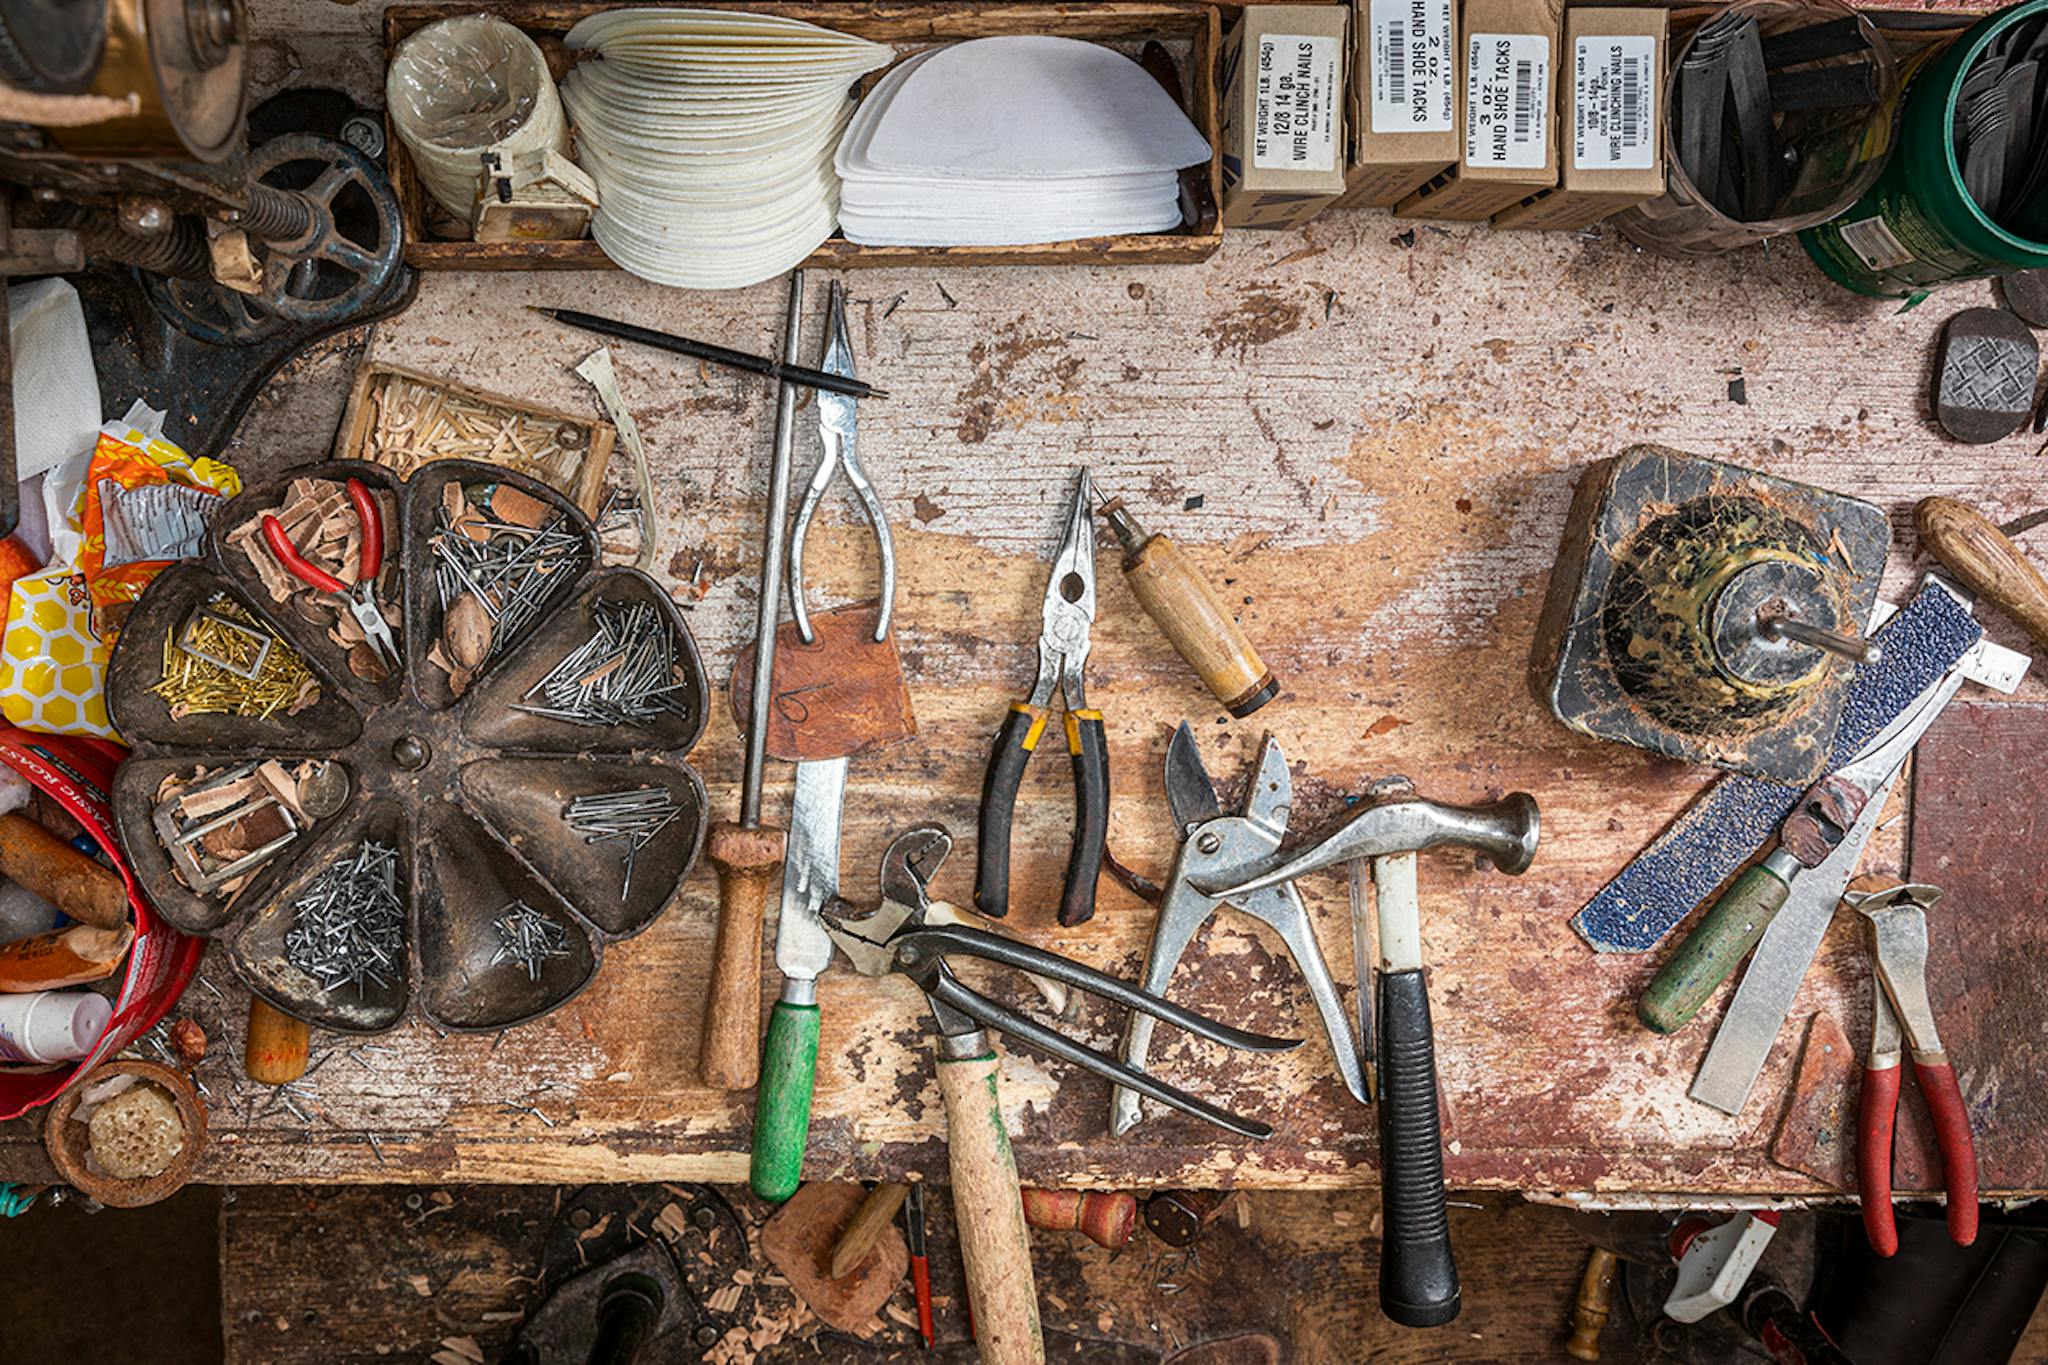 A well-worn work bench with sundry tools of the bootmaking trade.